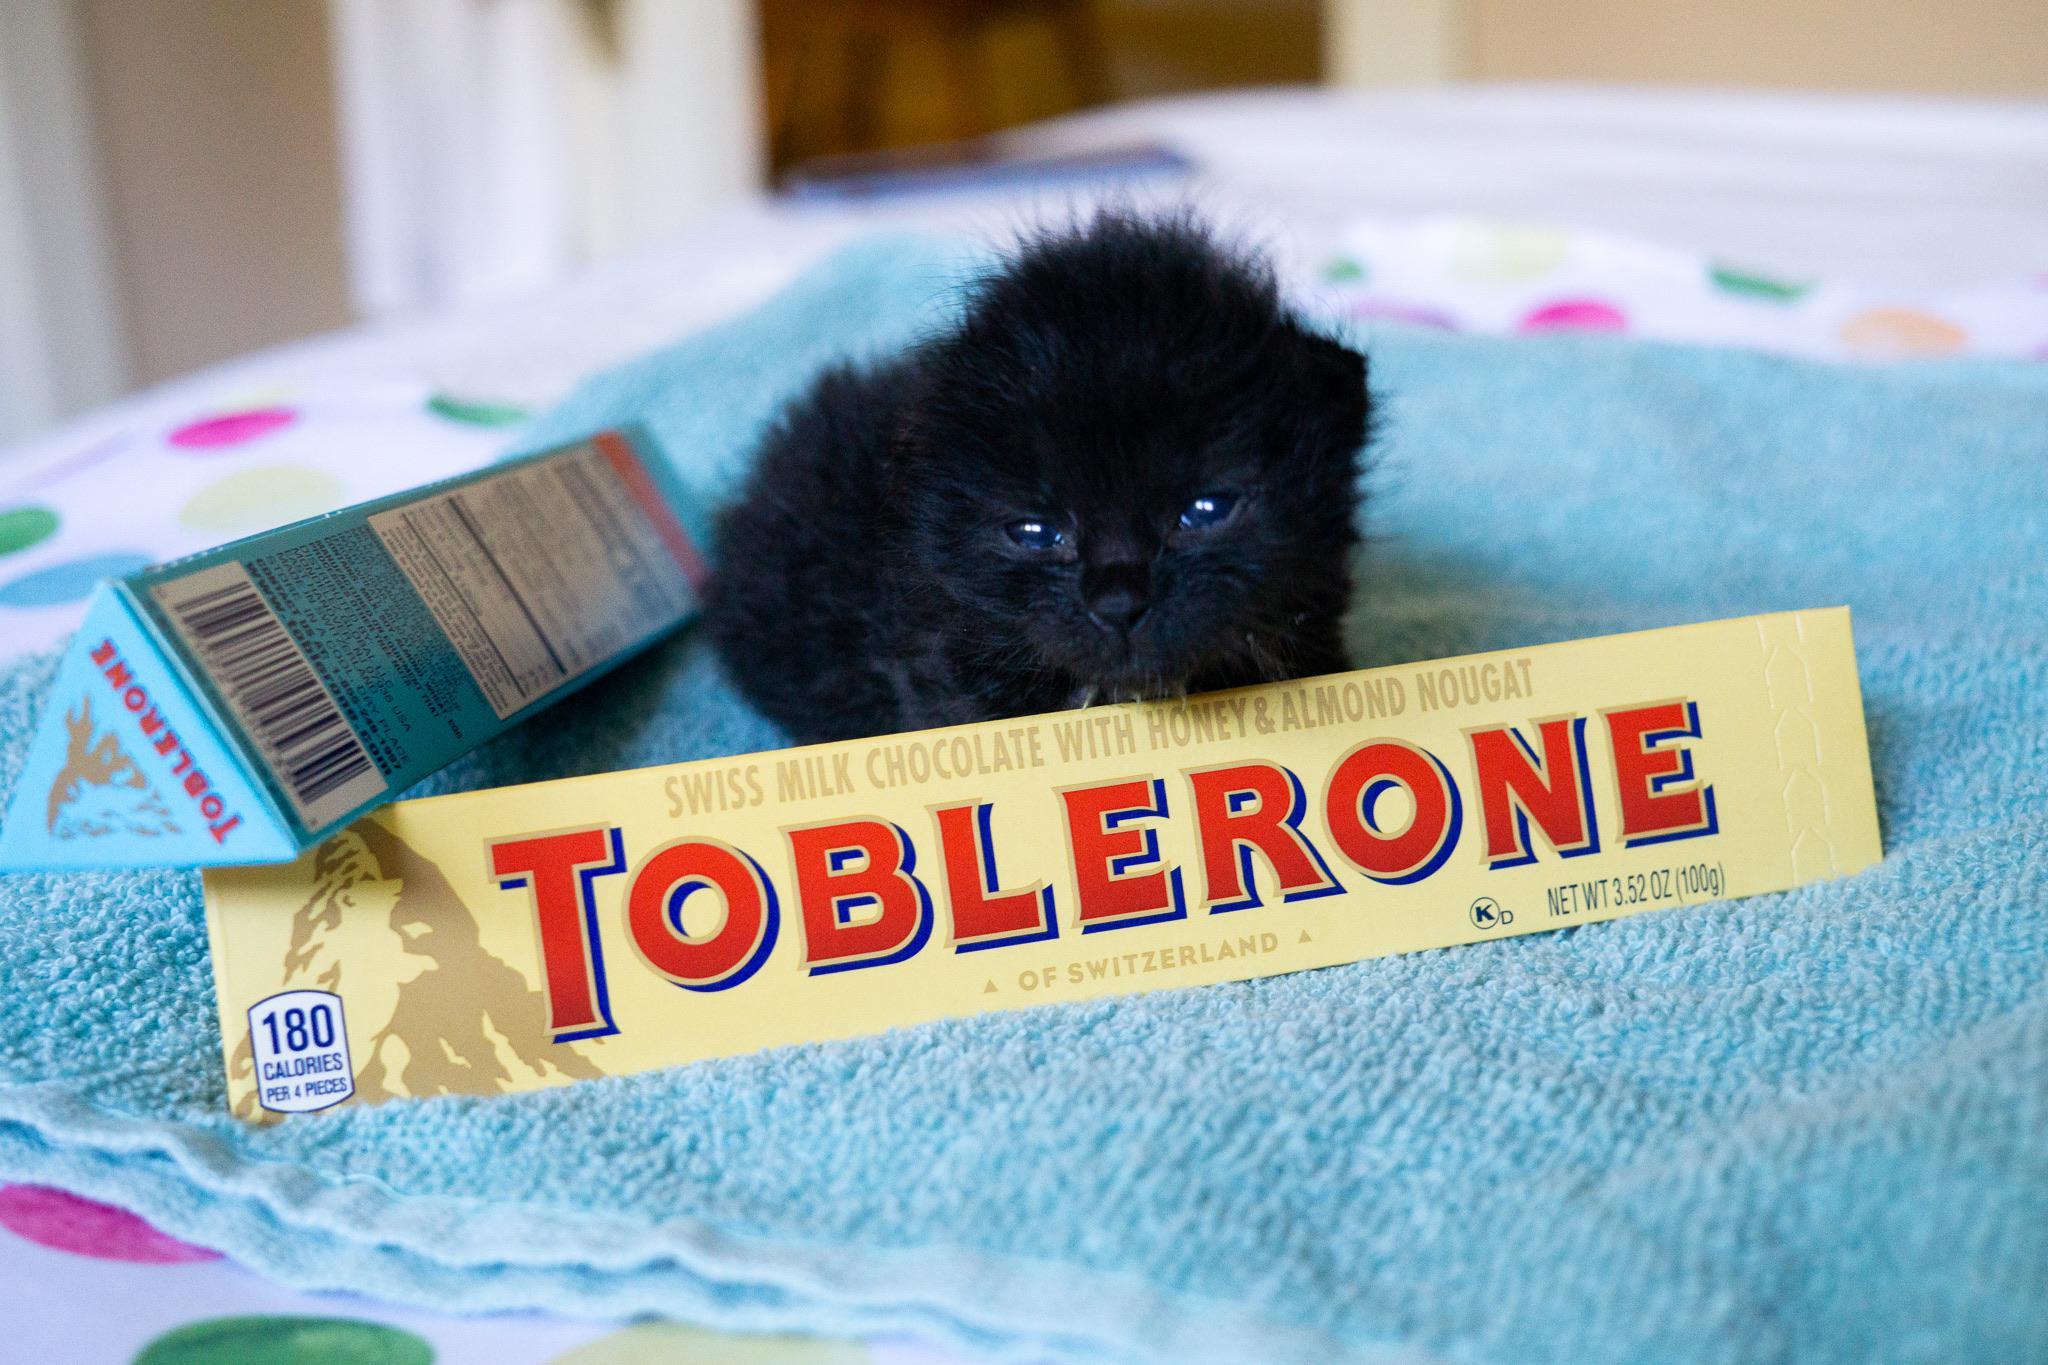 I did a photo shoot of foster kittens who were named after chocolates. Meet little Toblerone! - cat, Kittens, Black cat, Toblerone, Chocolate, Swiss, Milota, Reddit